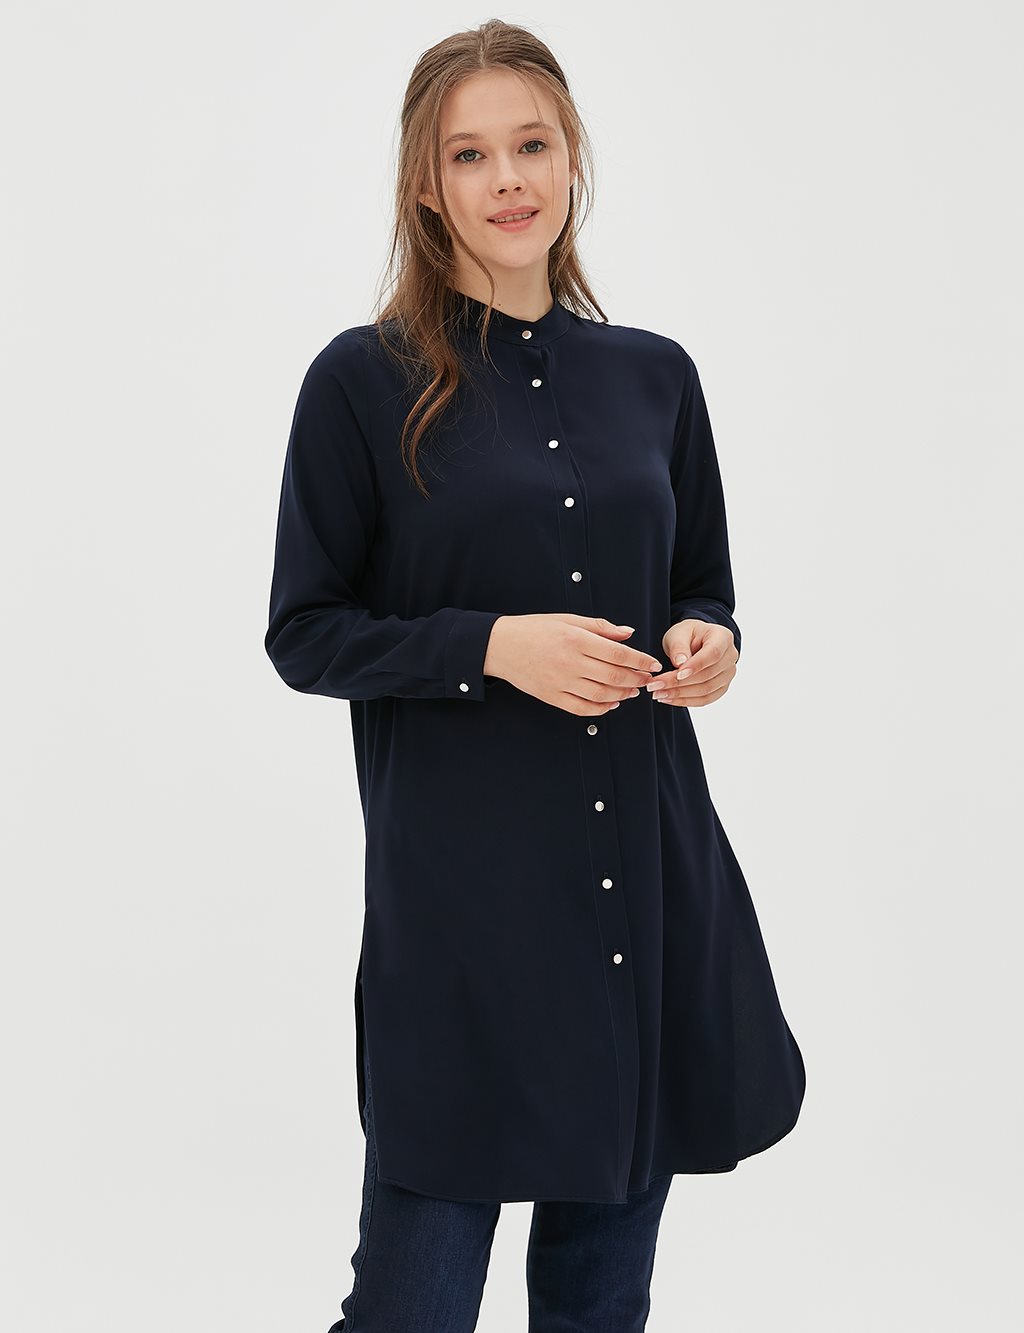 Tunic With Button SZ 21505 Navy